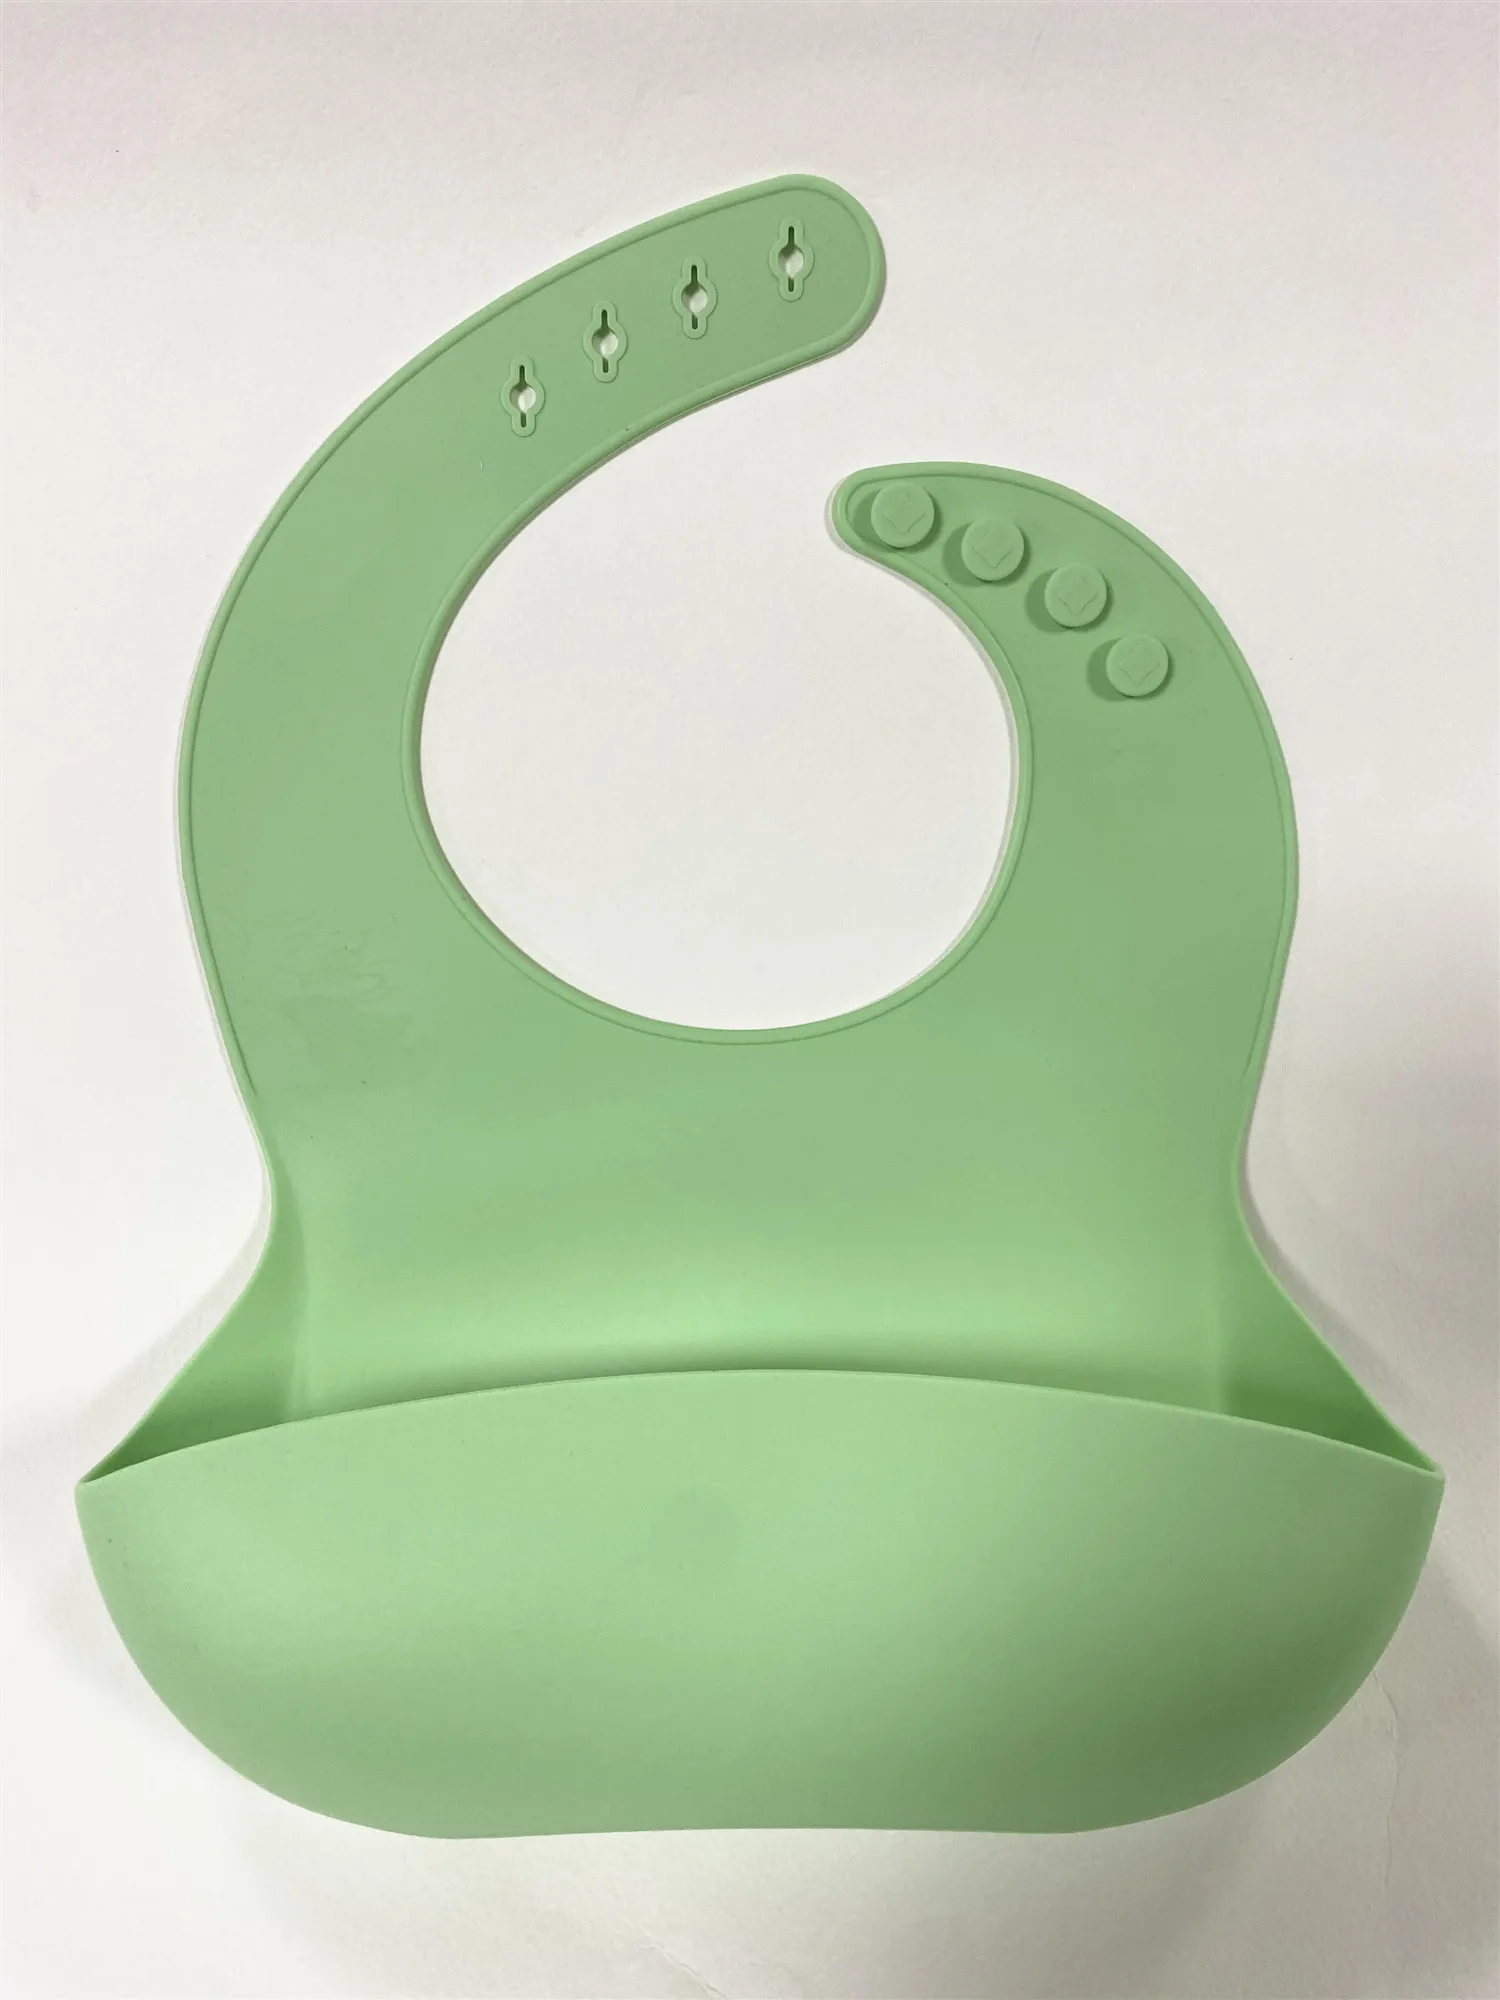 Silicone Baby Feeding Bibs Toddler Bibs with Food Catcher for Baby Girls and Boys, Adjustable Easy  Clean